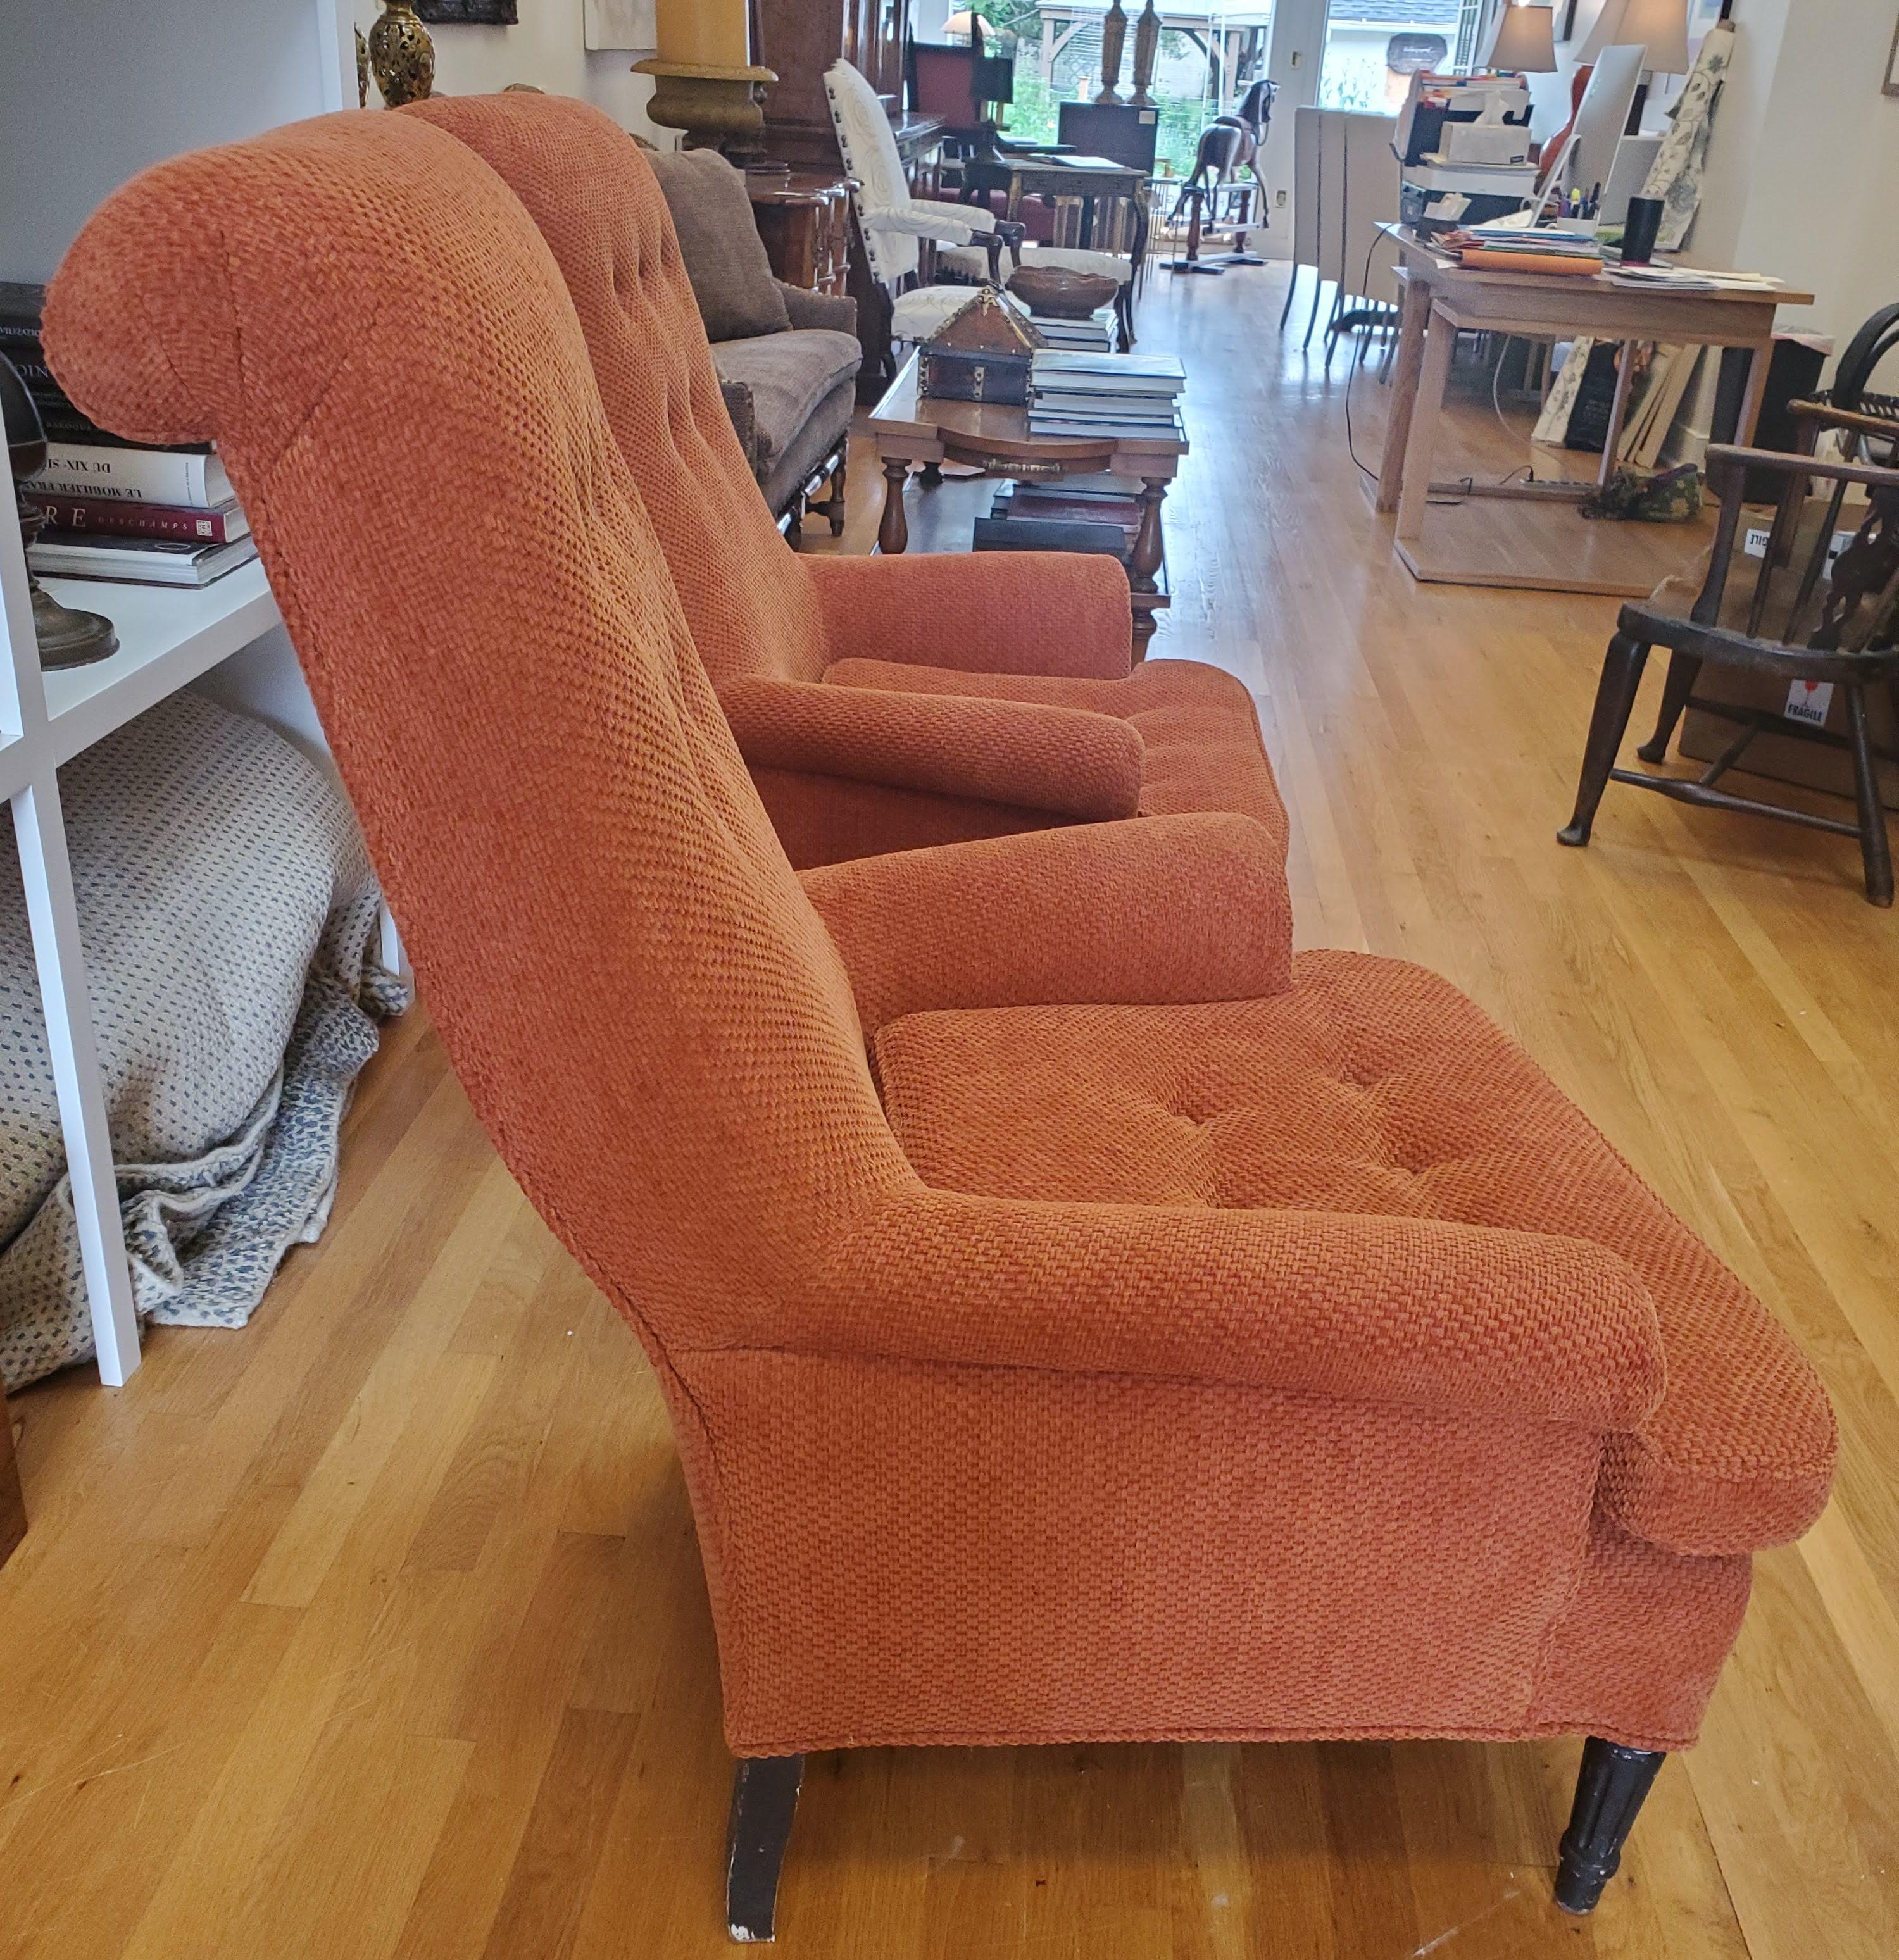 Pair of 19th Century English Club Chairs with Orange Chenille Upholstery For Sale 1